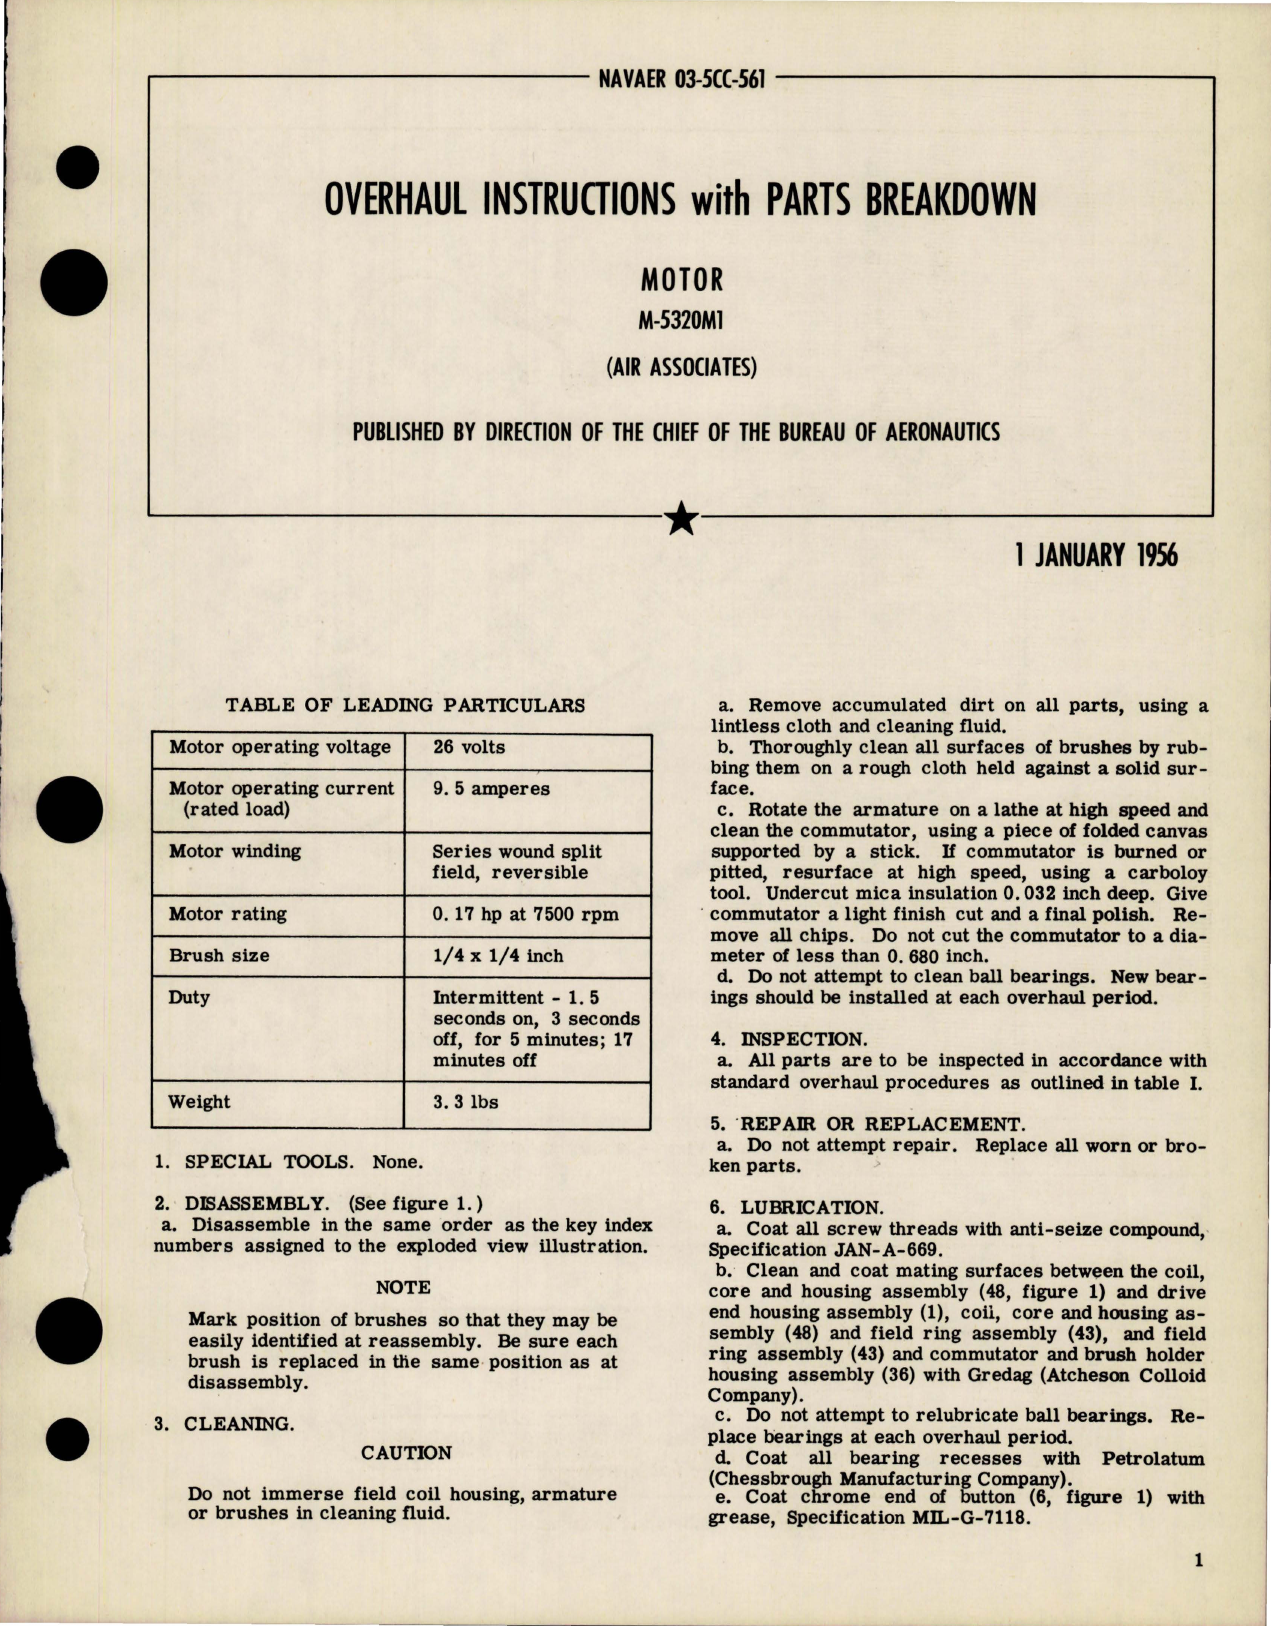 Sample page 1 from AirCorps Library document: Overhaul Instructions with Parts Breakdown for Motor - M5320M1